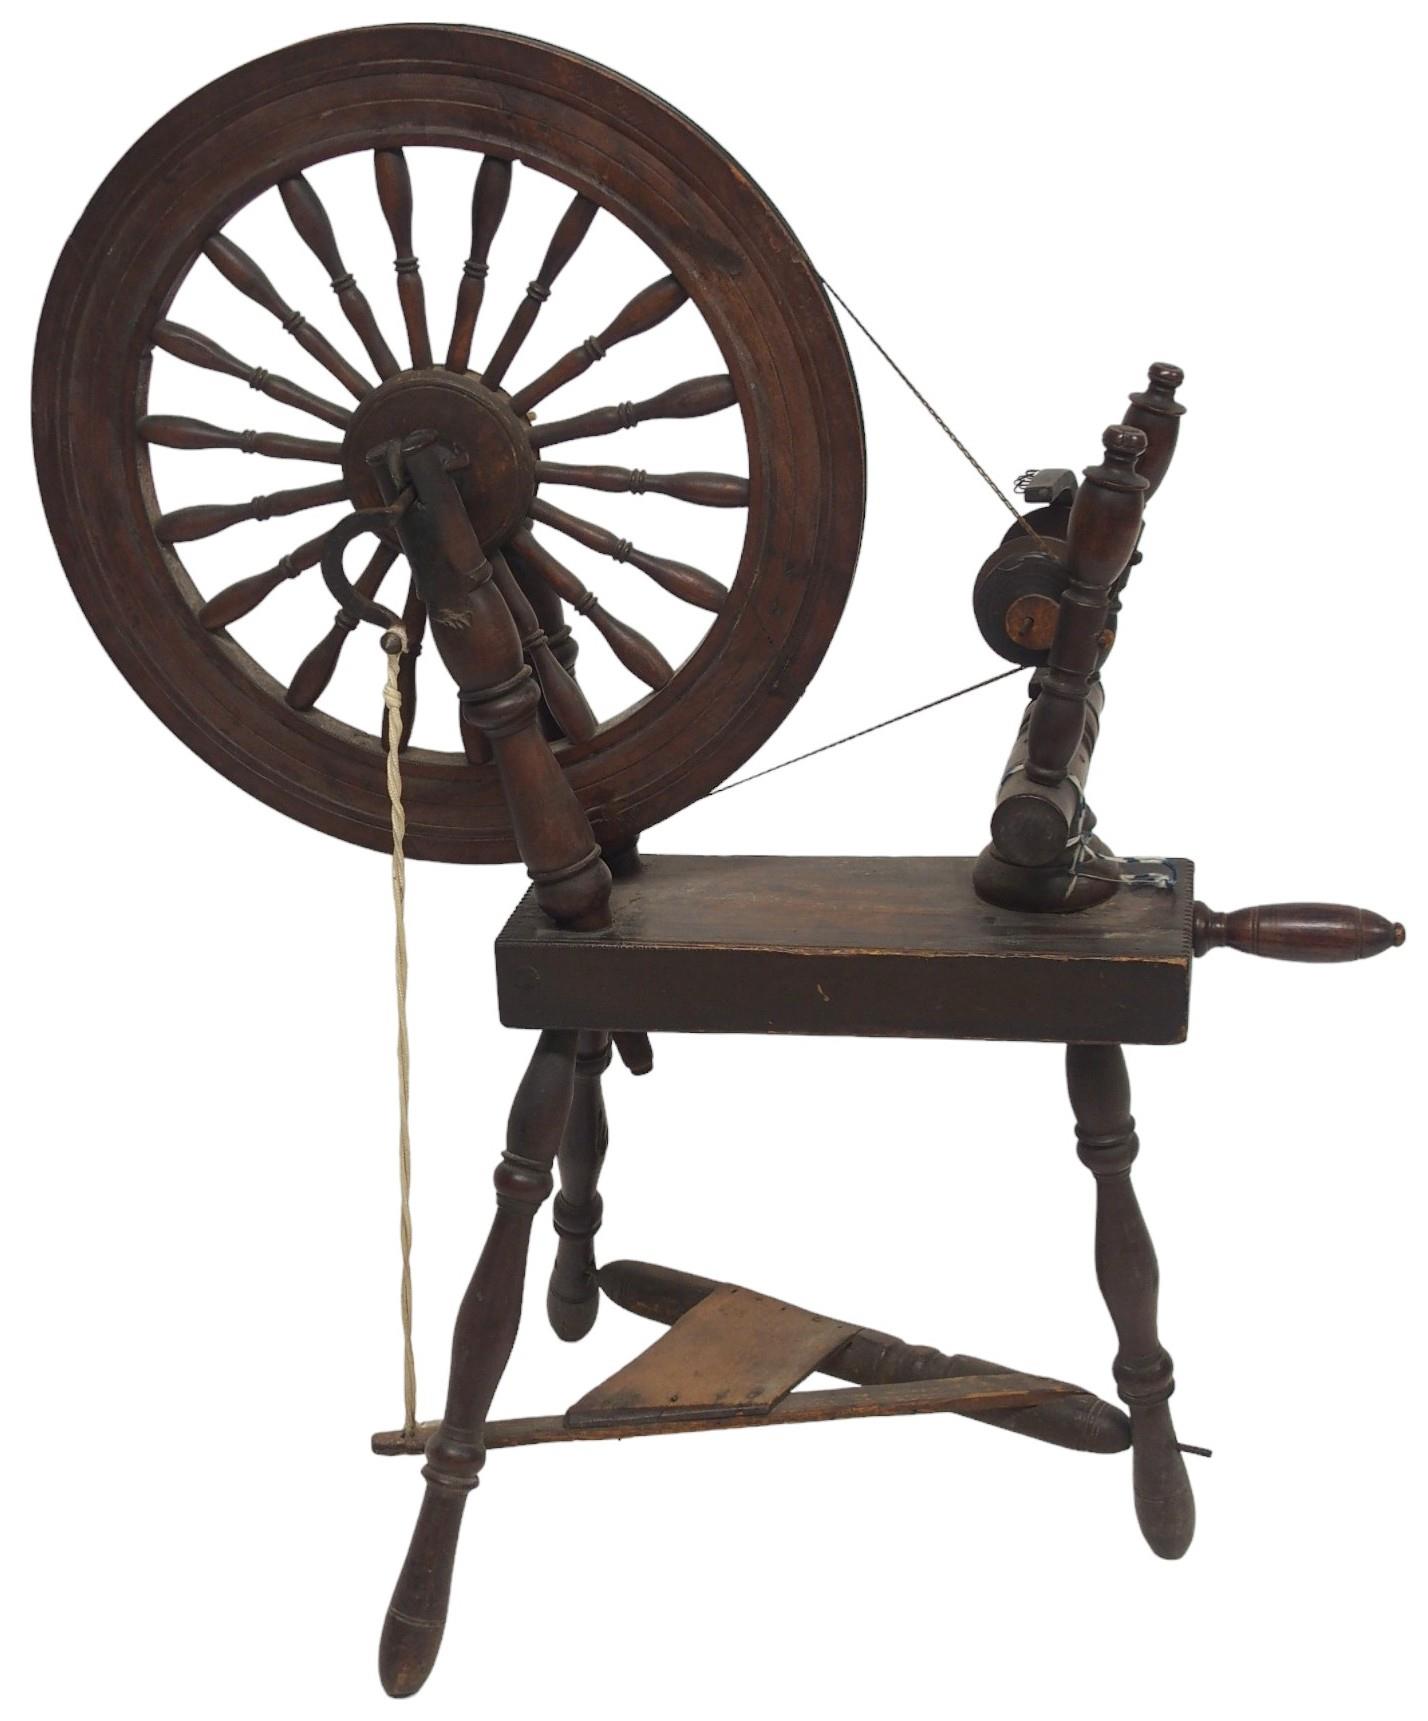 A 19TH CENTURY SCOTTISH SPINING WHEEL  with 56cm turned spindle wheel on turned supports joined by